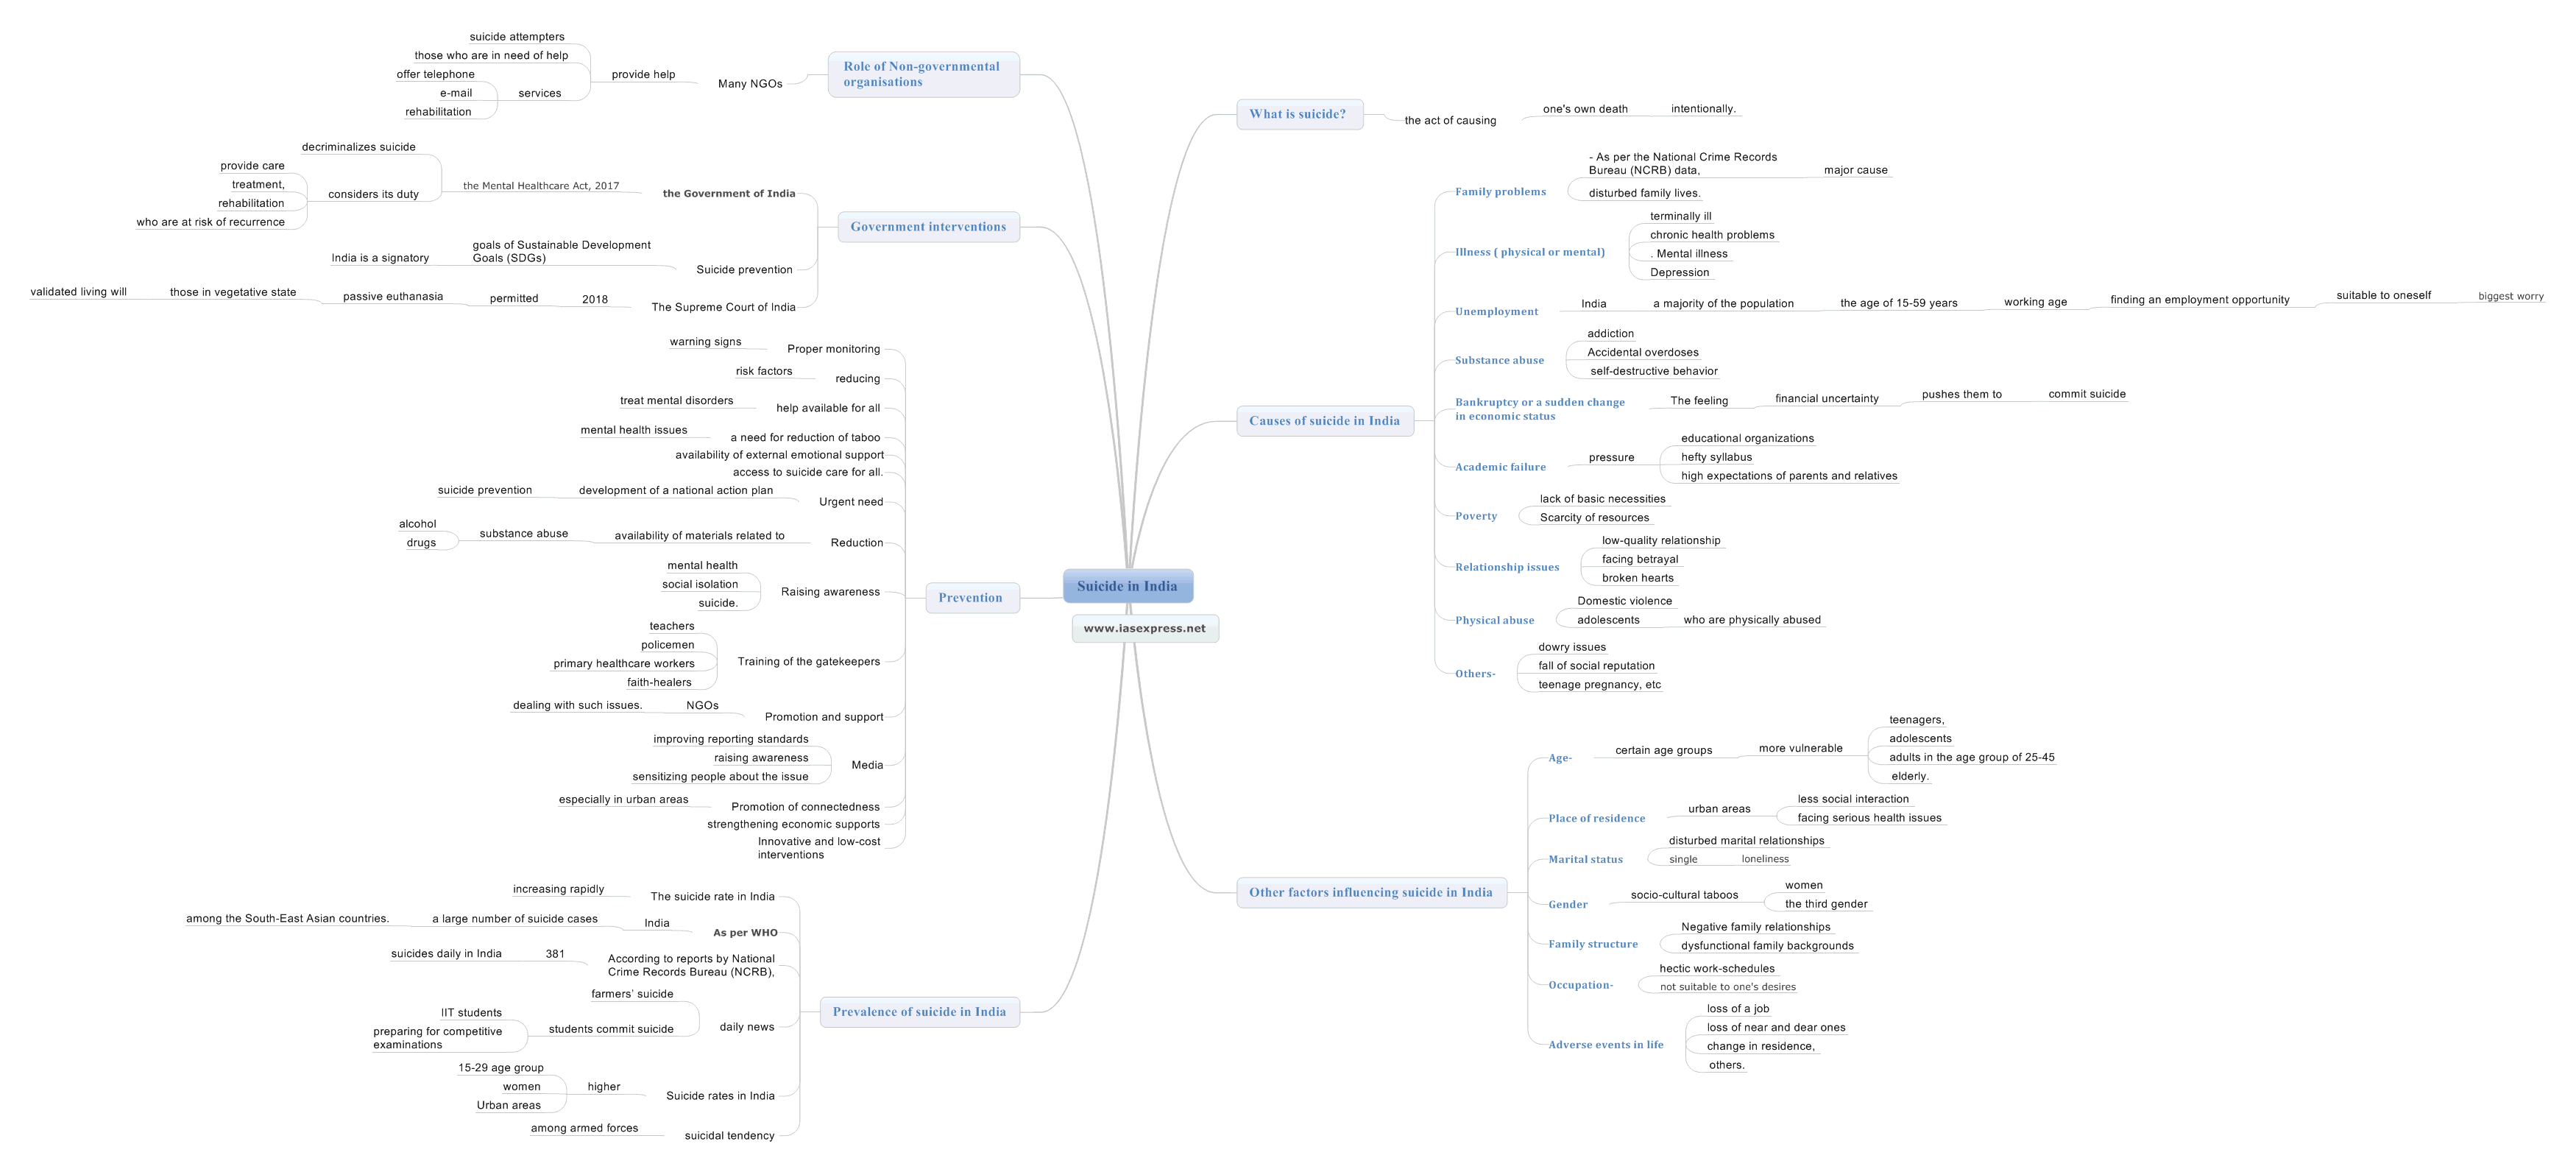 Suicide in India mindmap